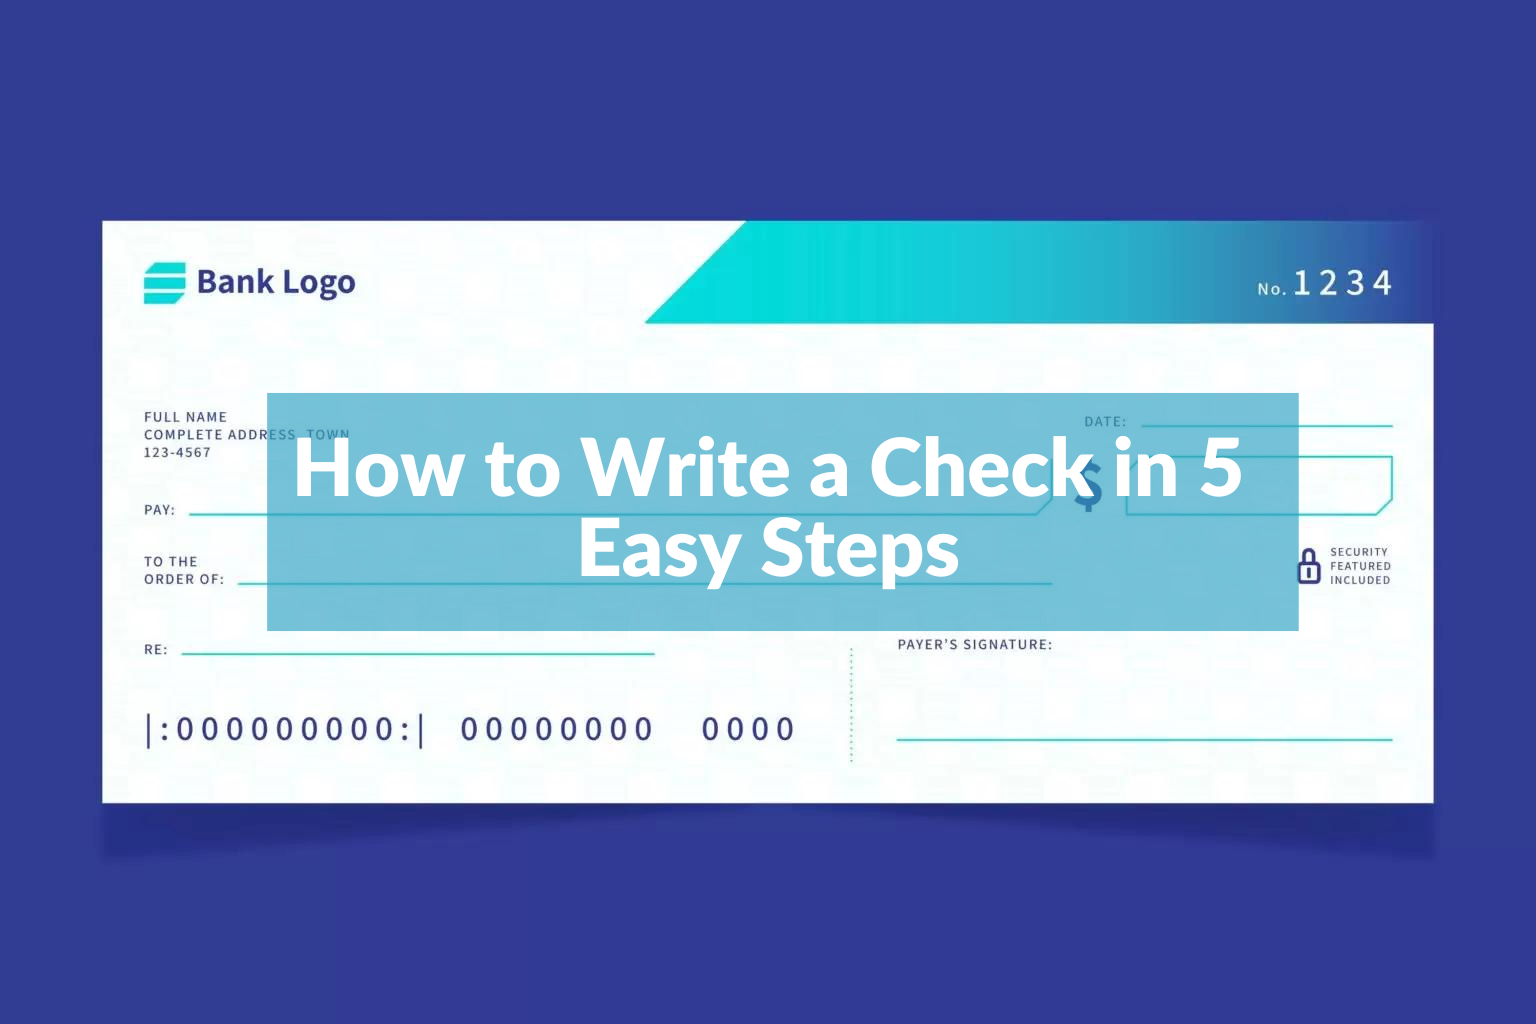 How to Write a Check in five easy steps